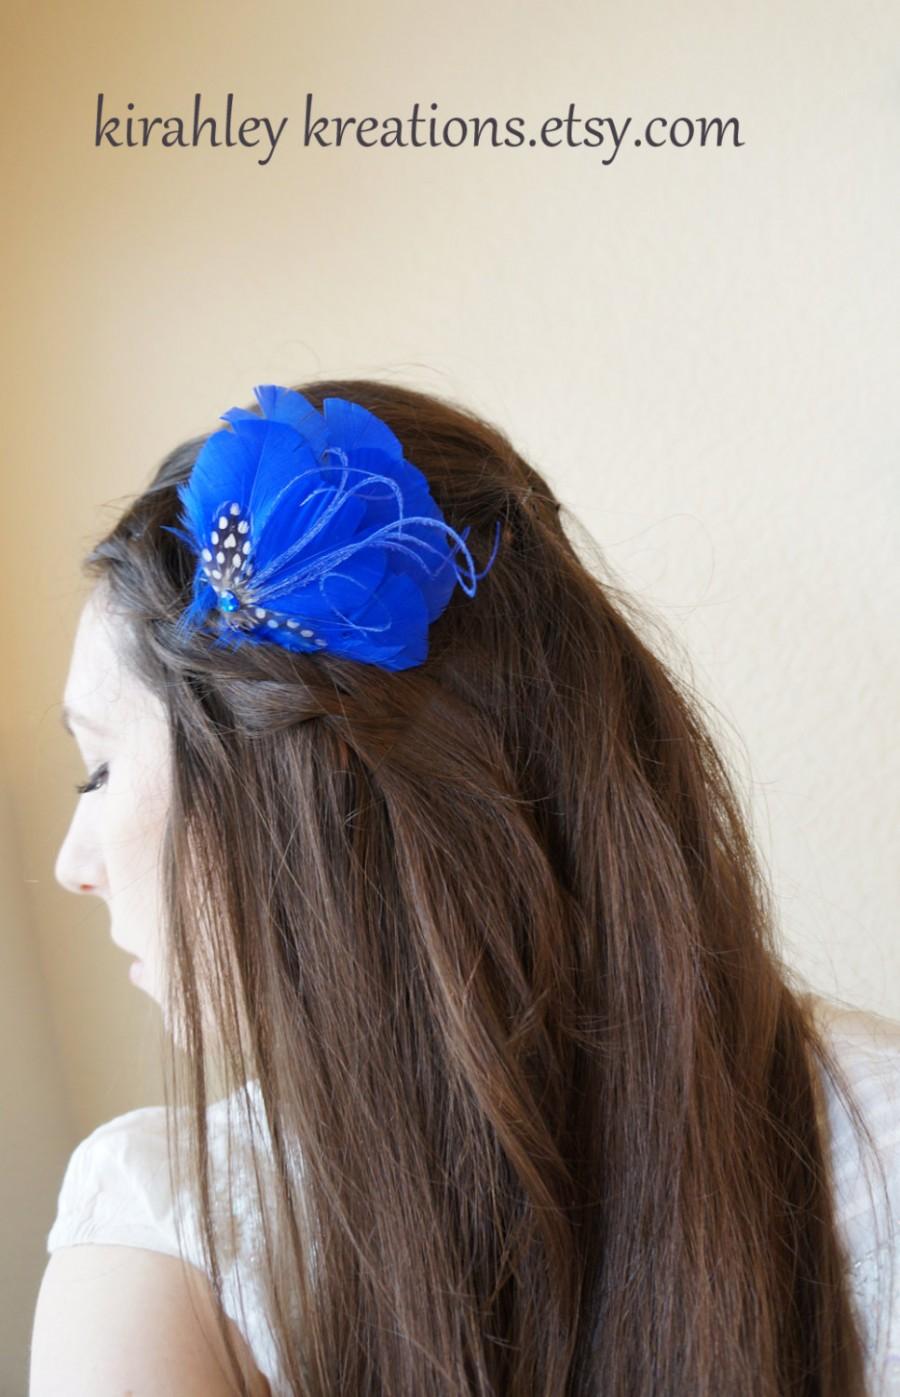 Hochzeit - Royal Cobalt Something BLUE BETTY Feather Fascinator Hairpiece Hair Clip Spotted Guinea Peacock Herl Jewel Bride Bridal Bridesmaid Prom